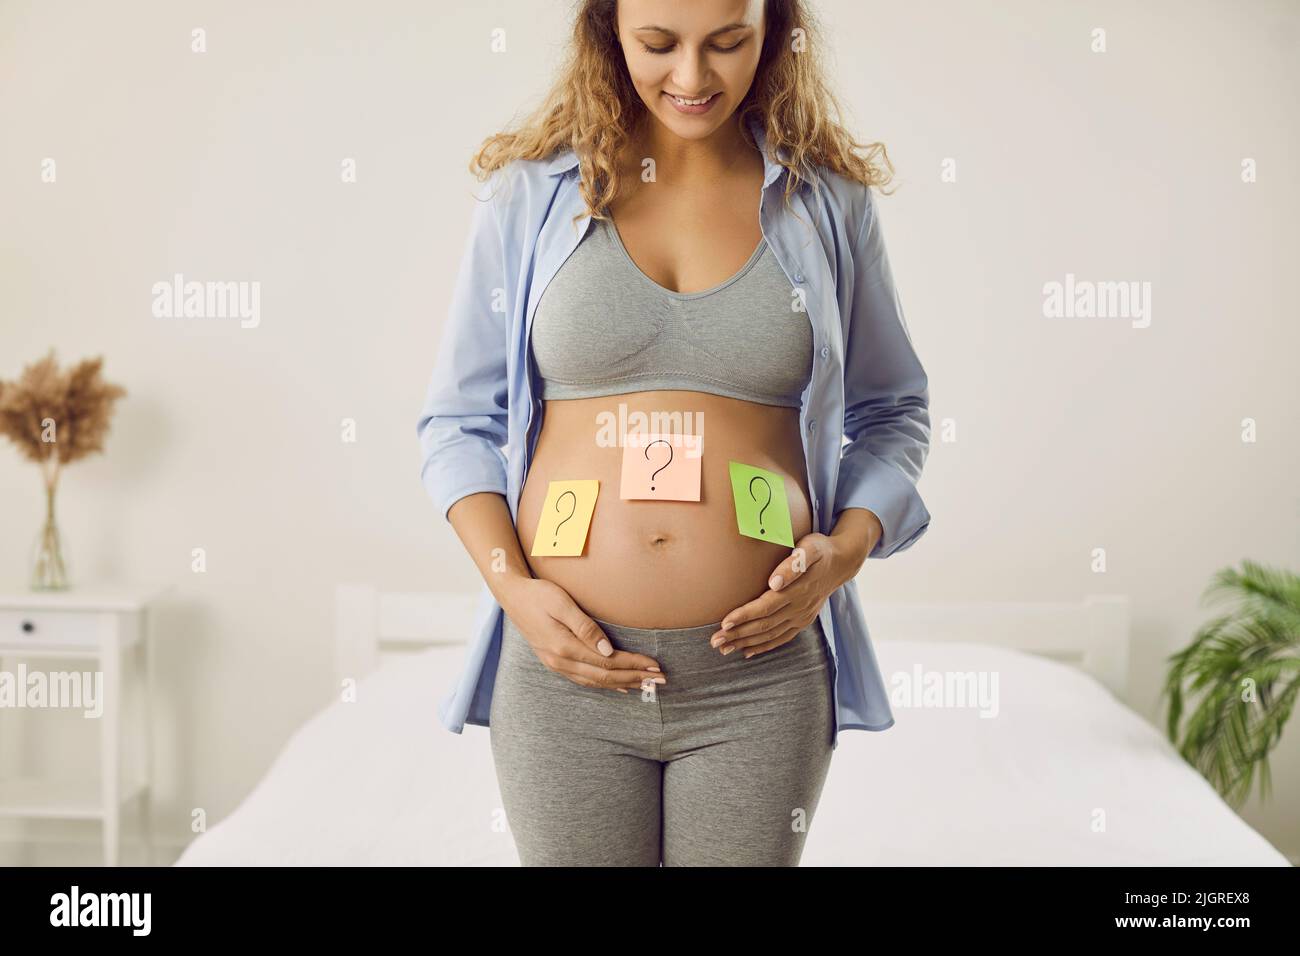 Happy pregnant woman wonder about baby gender Stock Photo